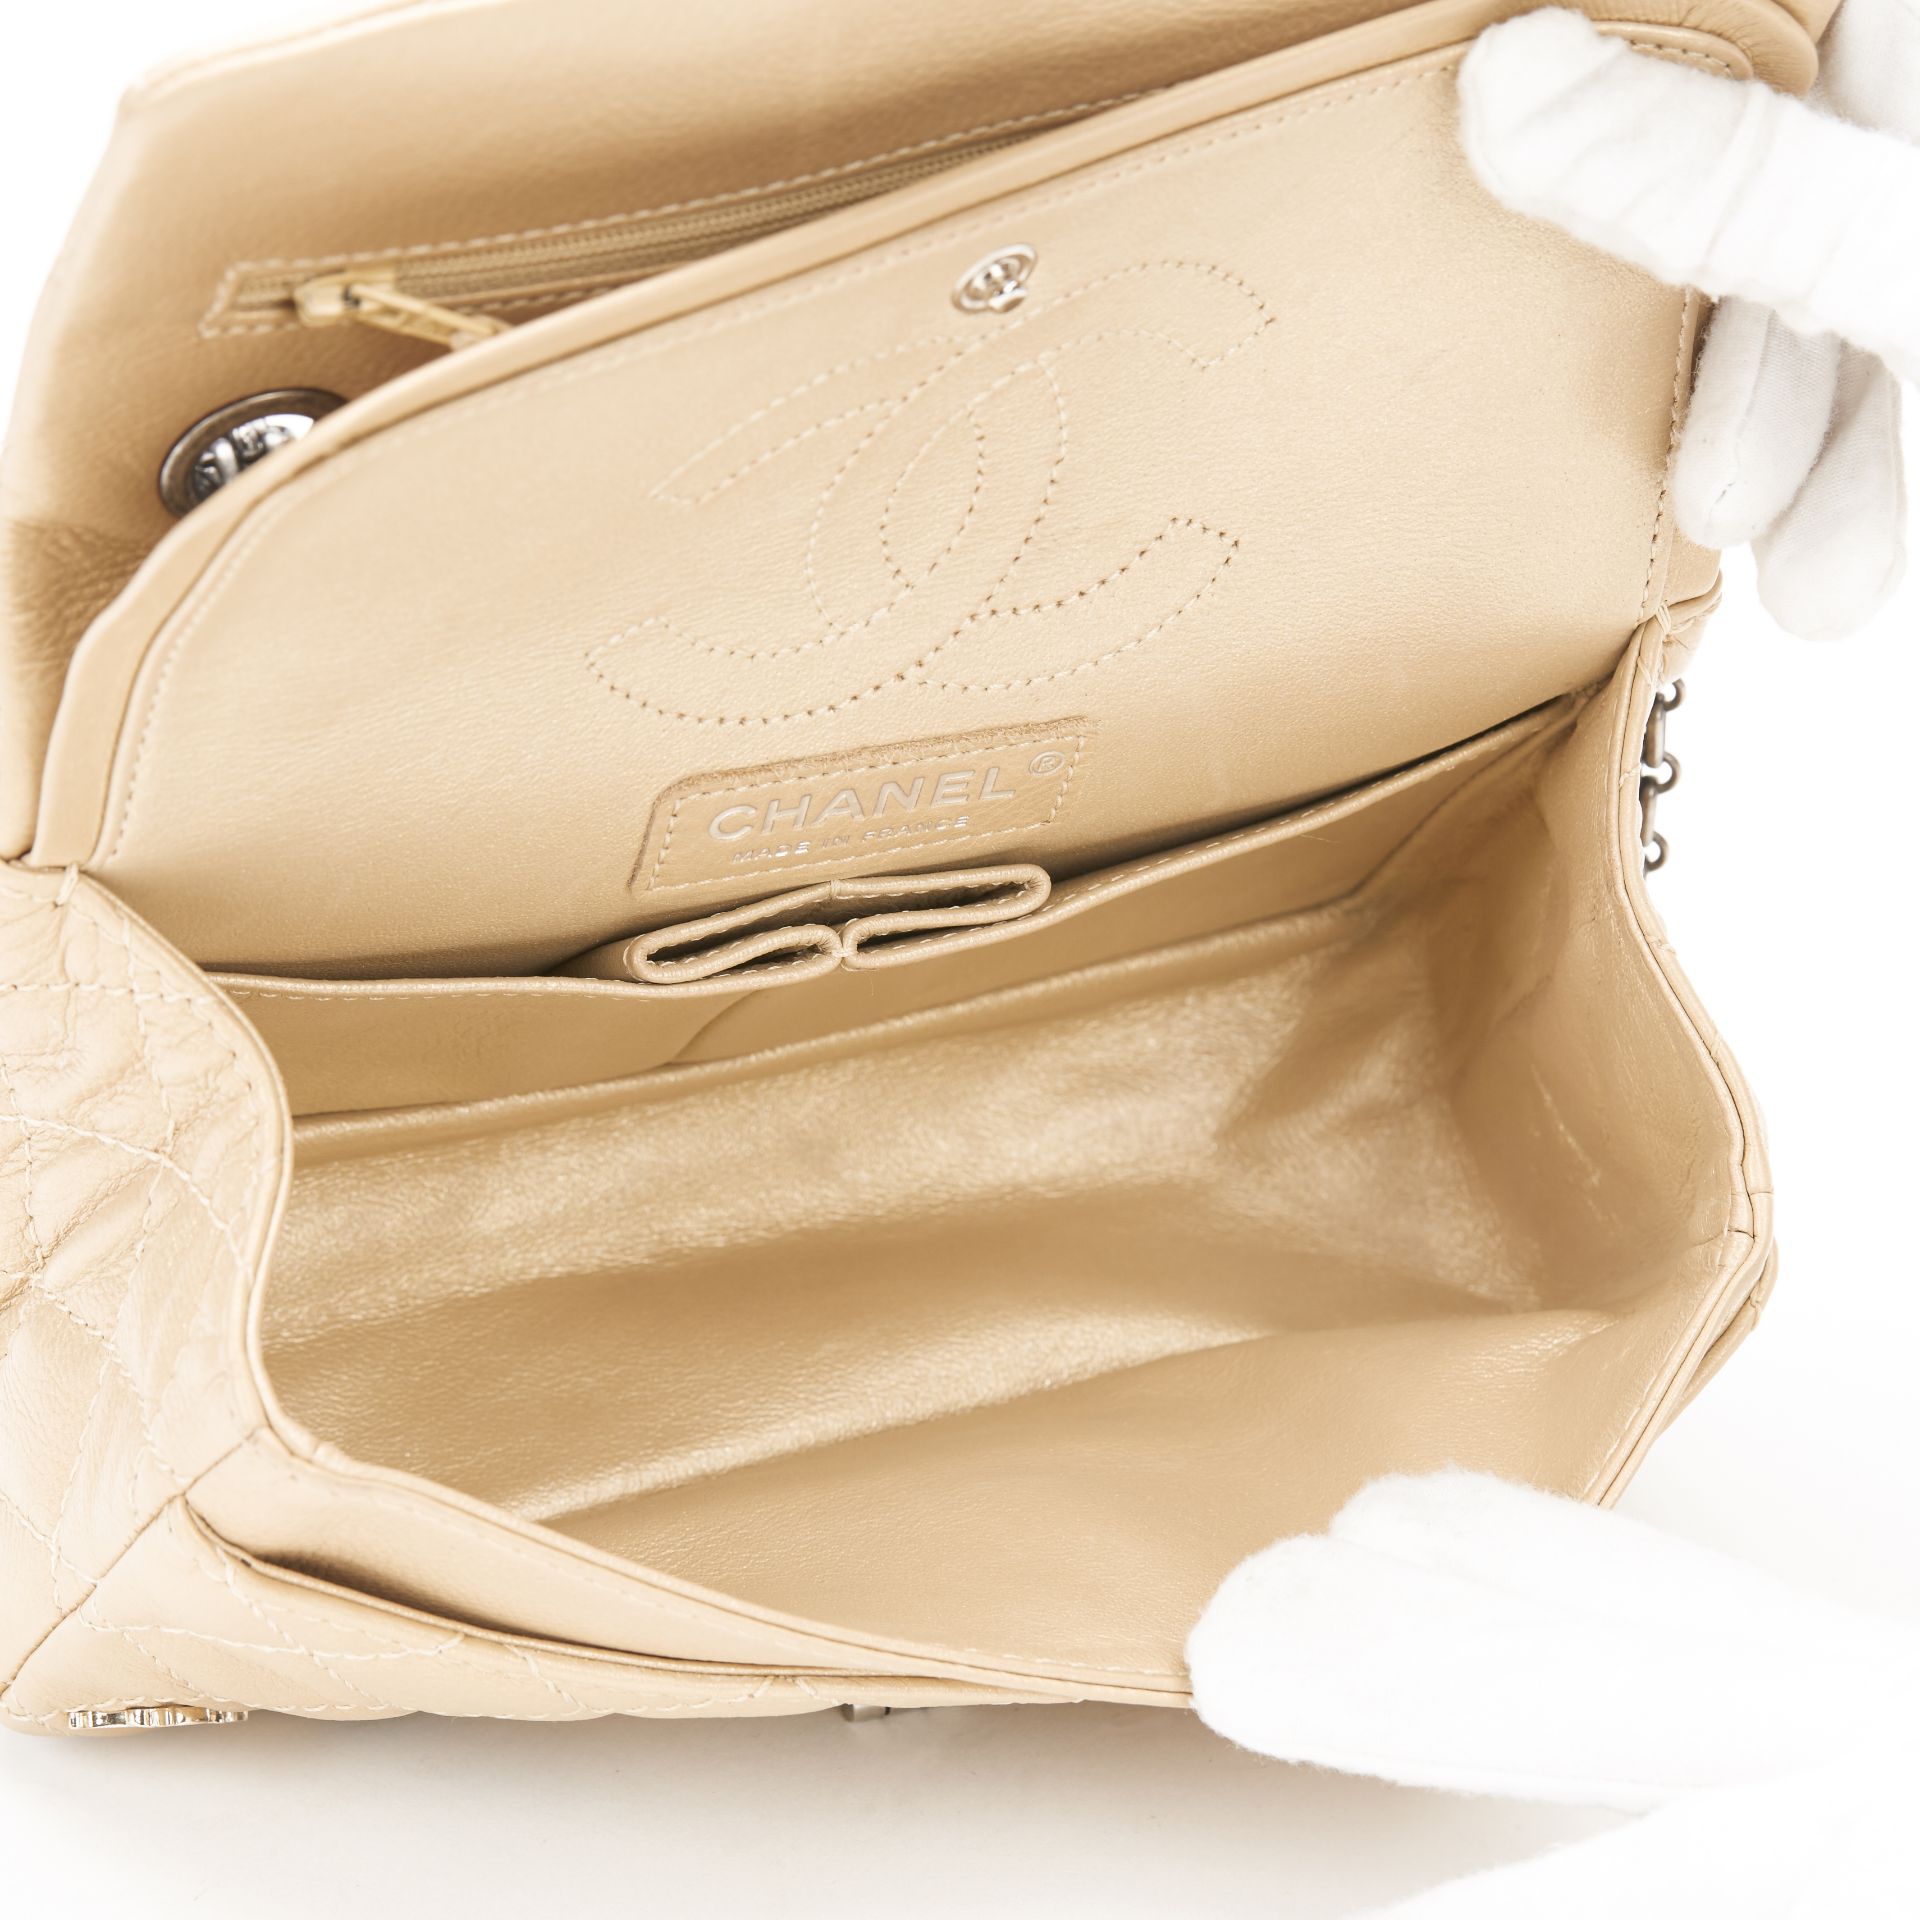 Gold Aged Metallic Calfskin Leather Lucky Charms 2.55 Reissue 224 Double Flap Bag - Image 10 of 13